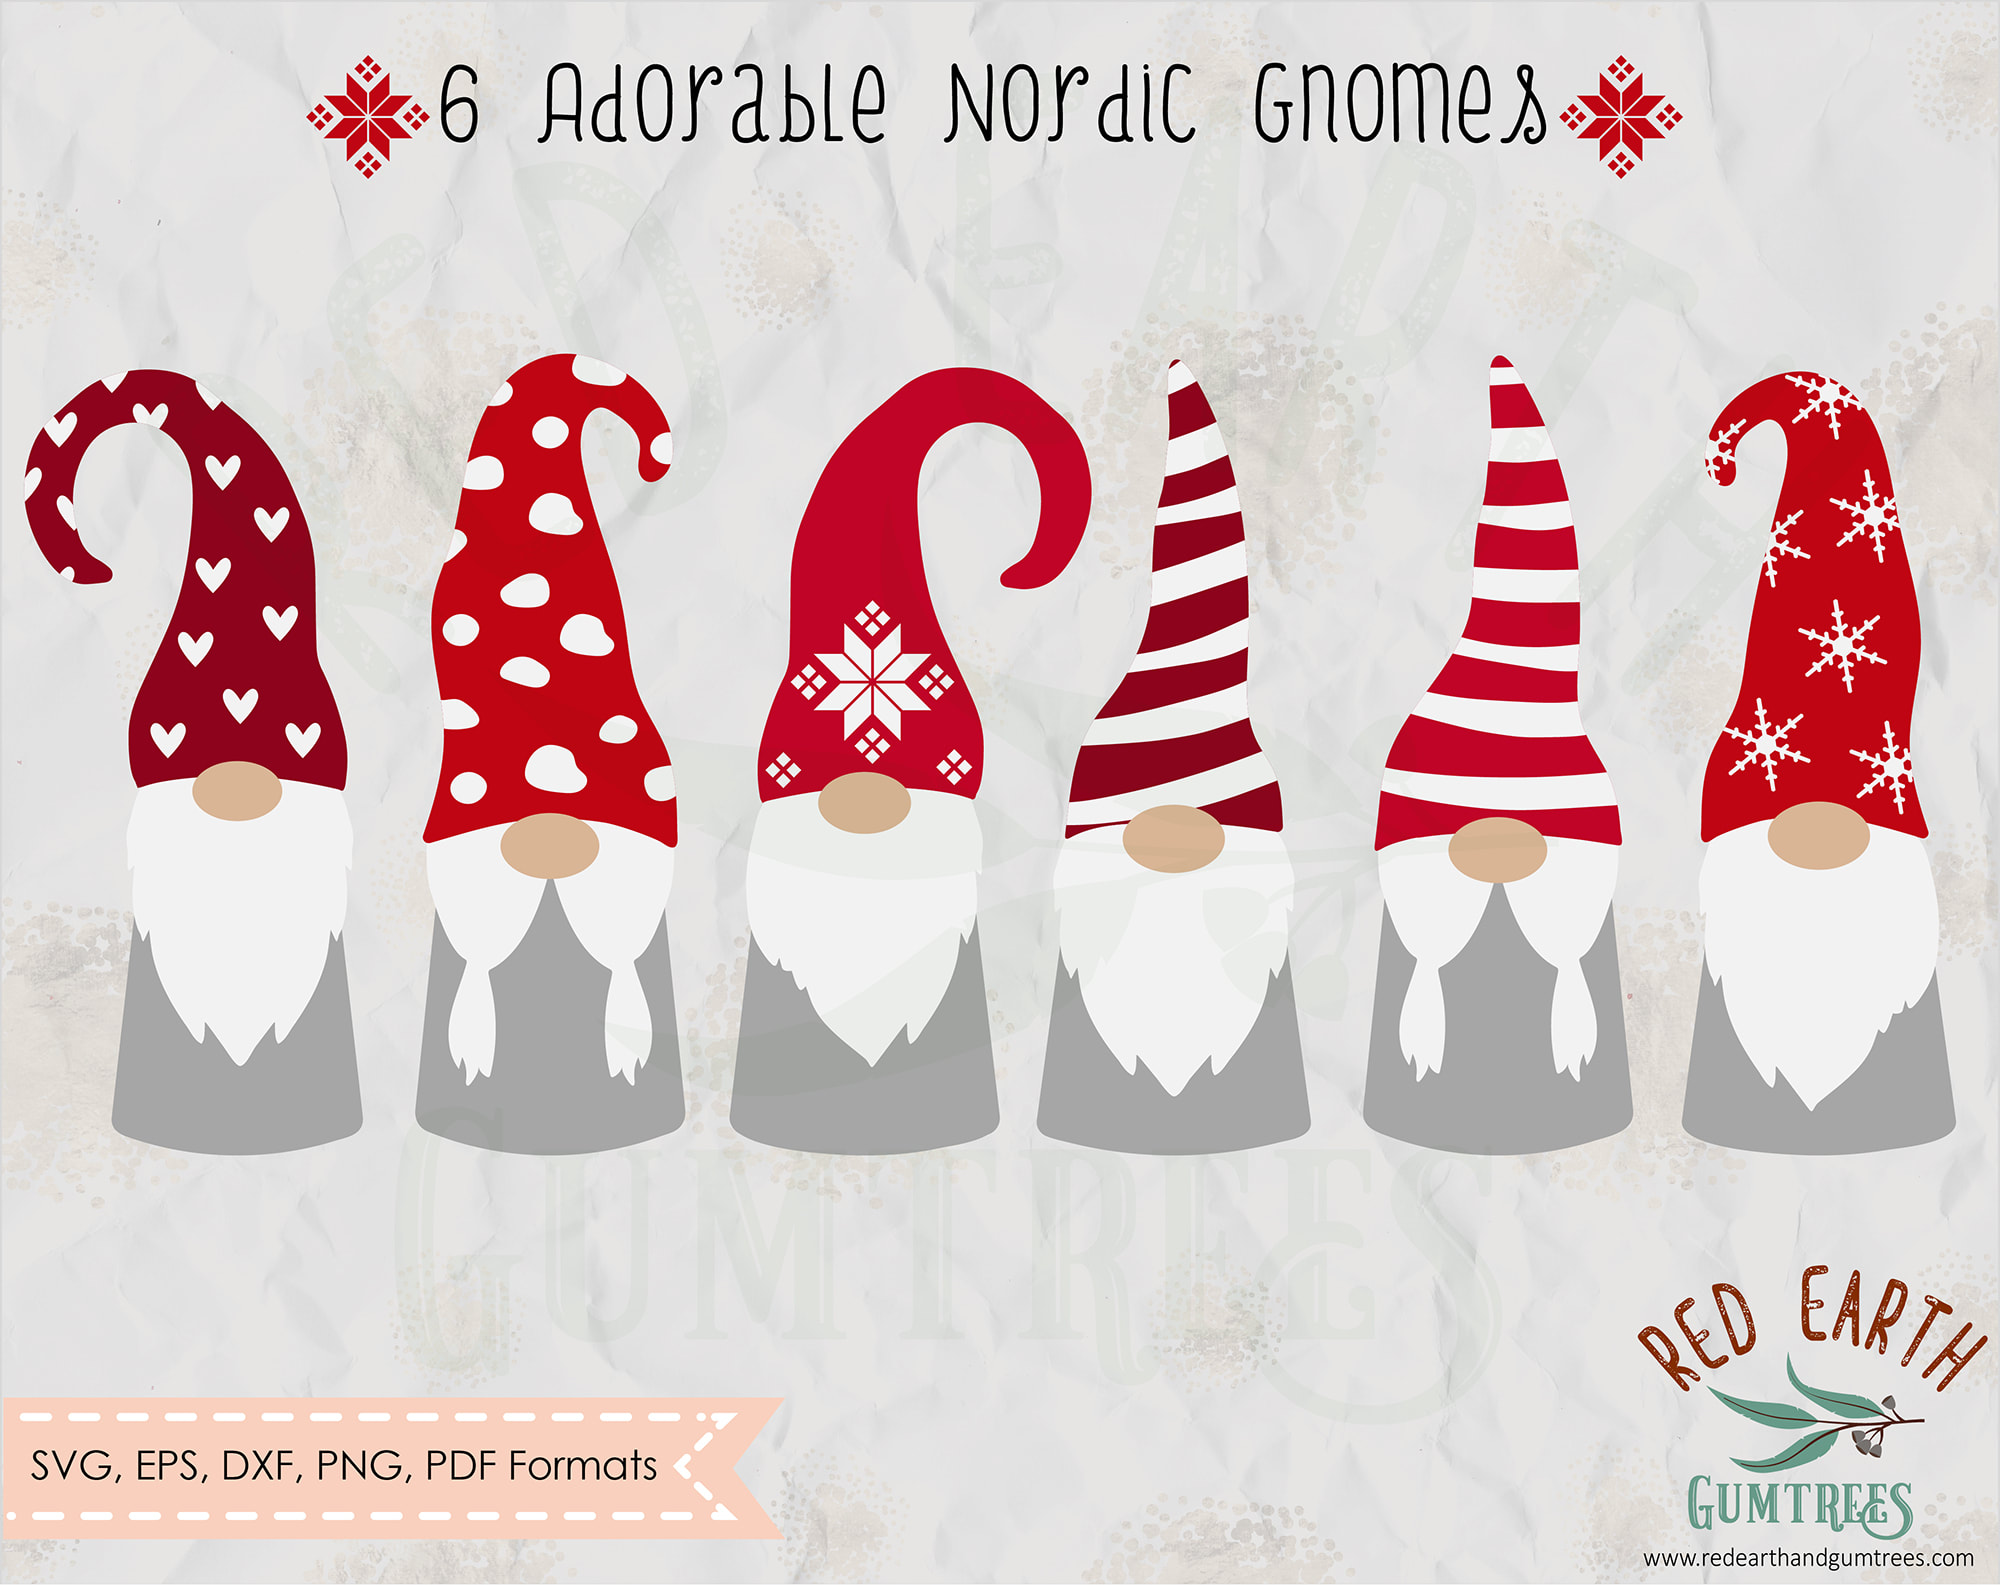 Nordic gnome bundle, Nordic Christmas gnome in SVG, EPS, PDF, DXF, PNG  formats.